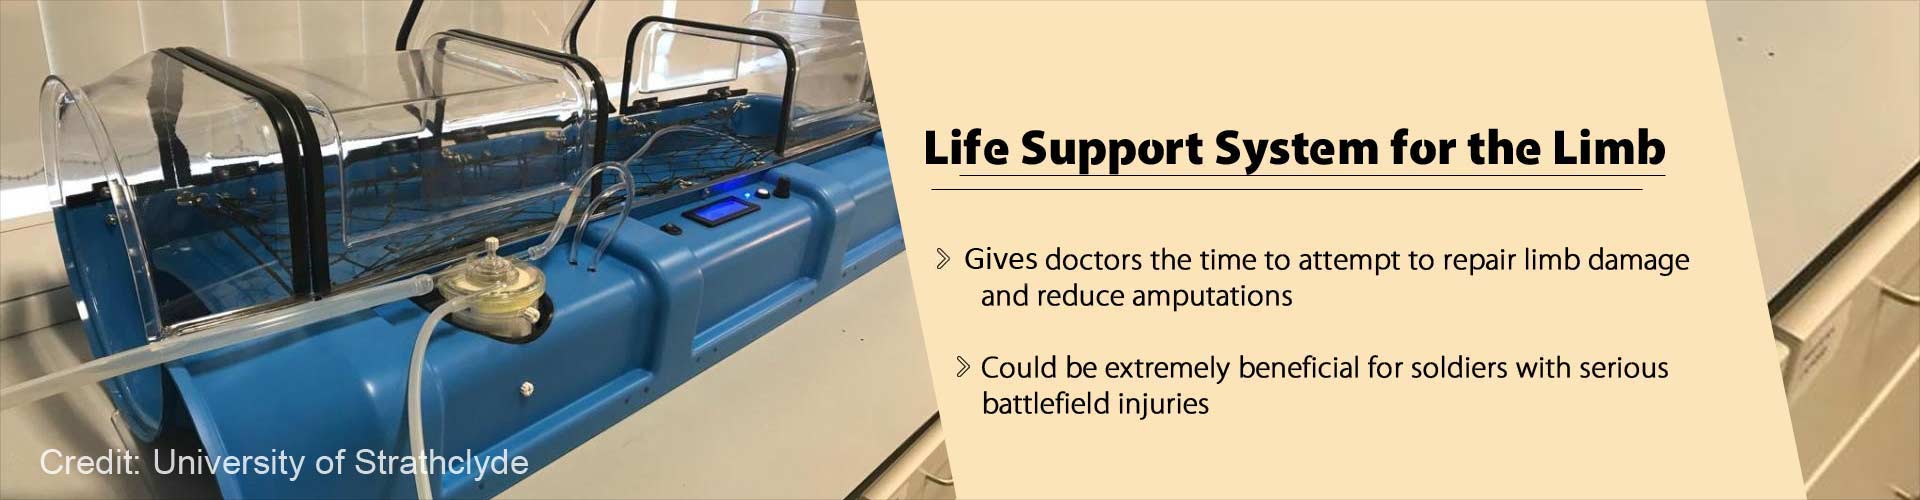 life support system for the limb
- give doctors the time to attempt to repair limb damage and reduce amputations
- could be extremely beneficial for soldiers with serious battlefield injuries